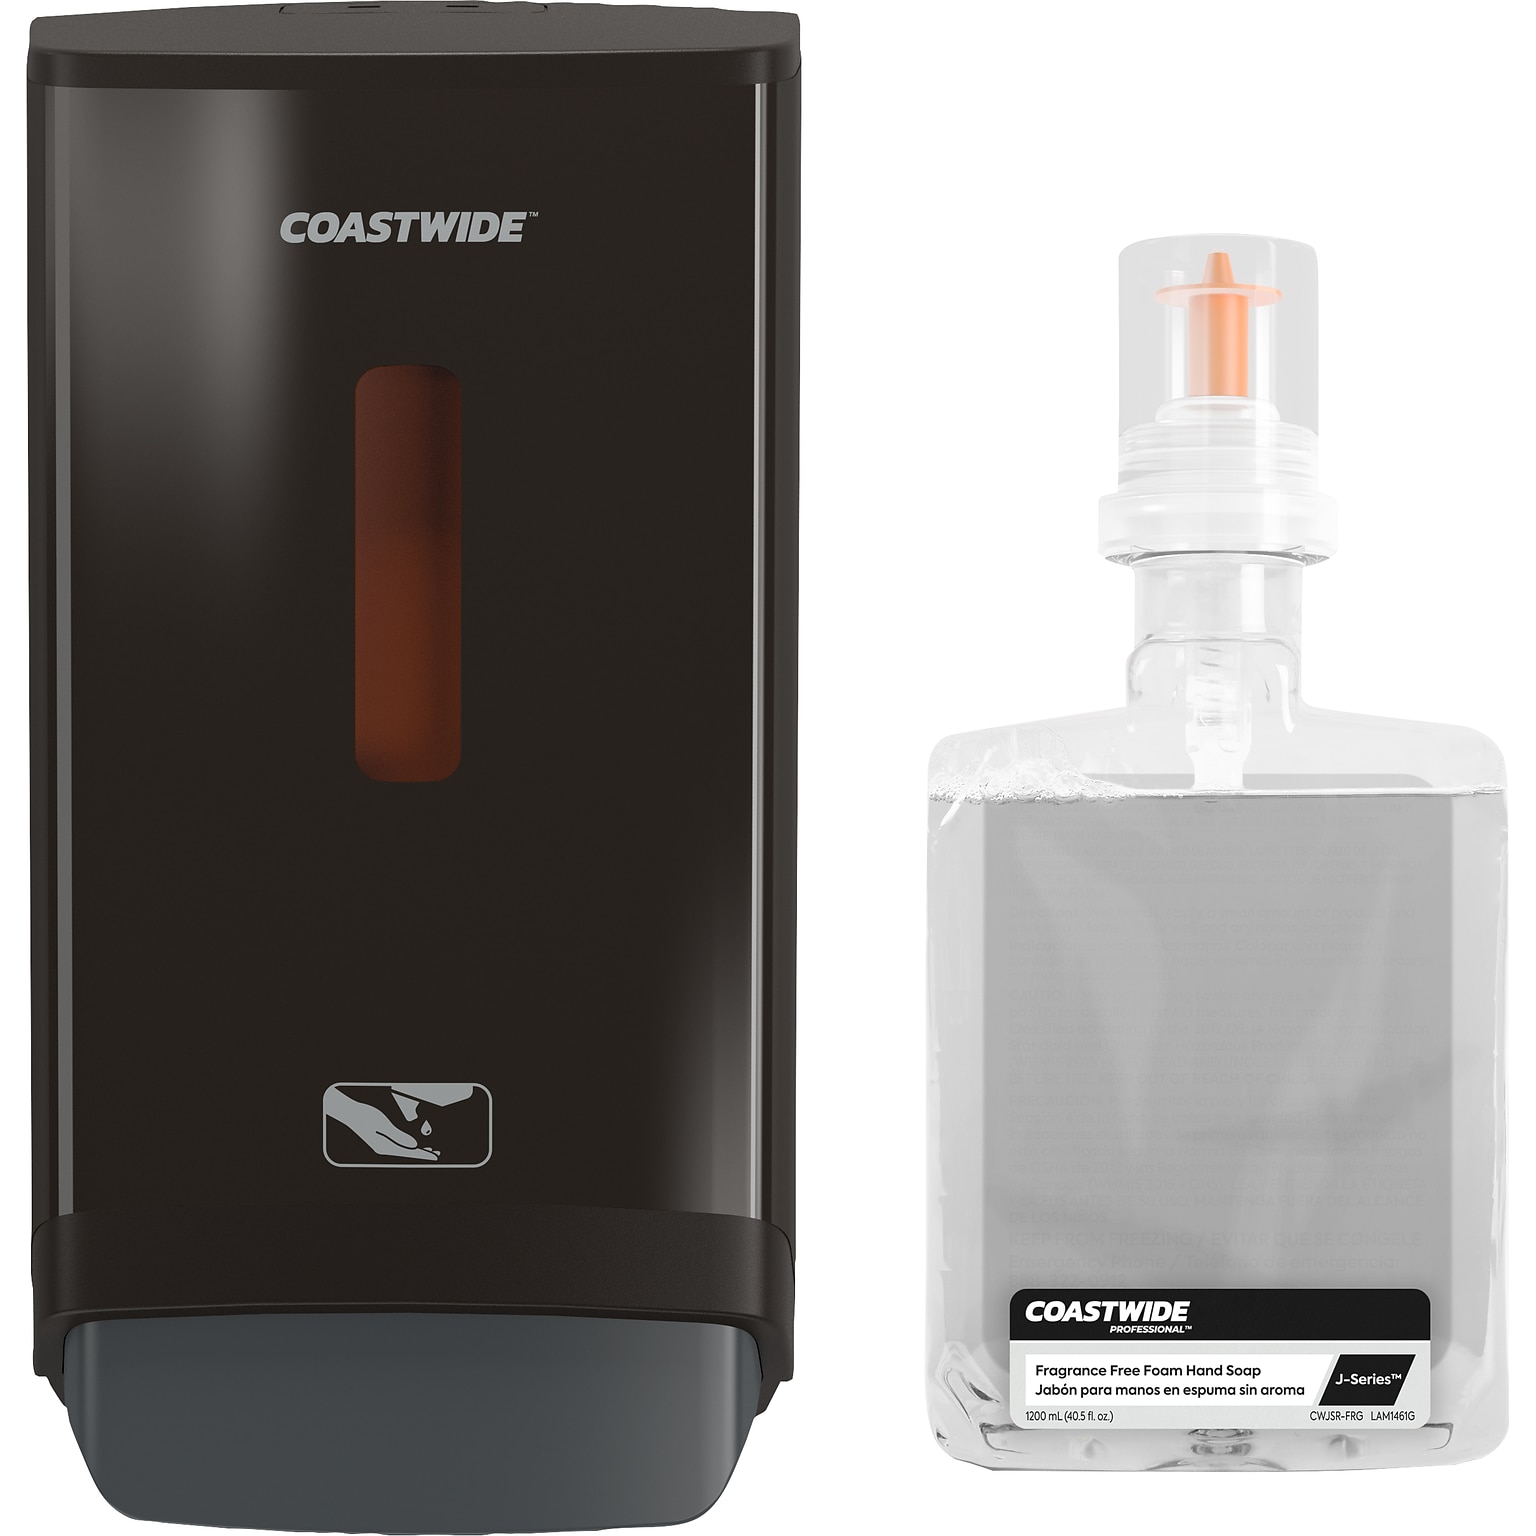 Free Coastwide Professional™ J Series Hand Soap Dispenser with purchase of 2 Coastwide Professional™ J-Series Hand Soap Refill